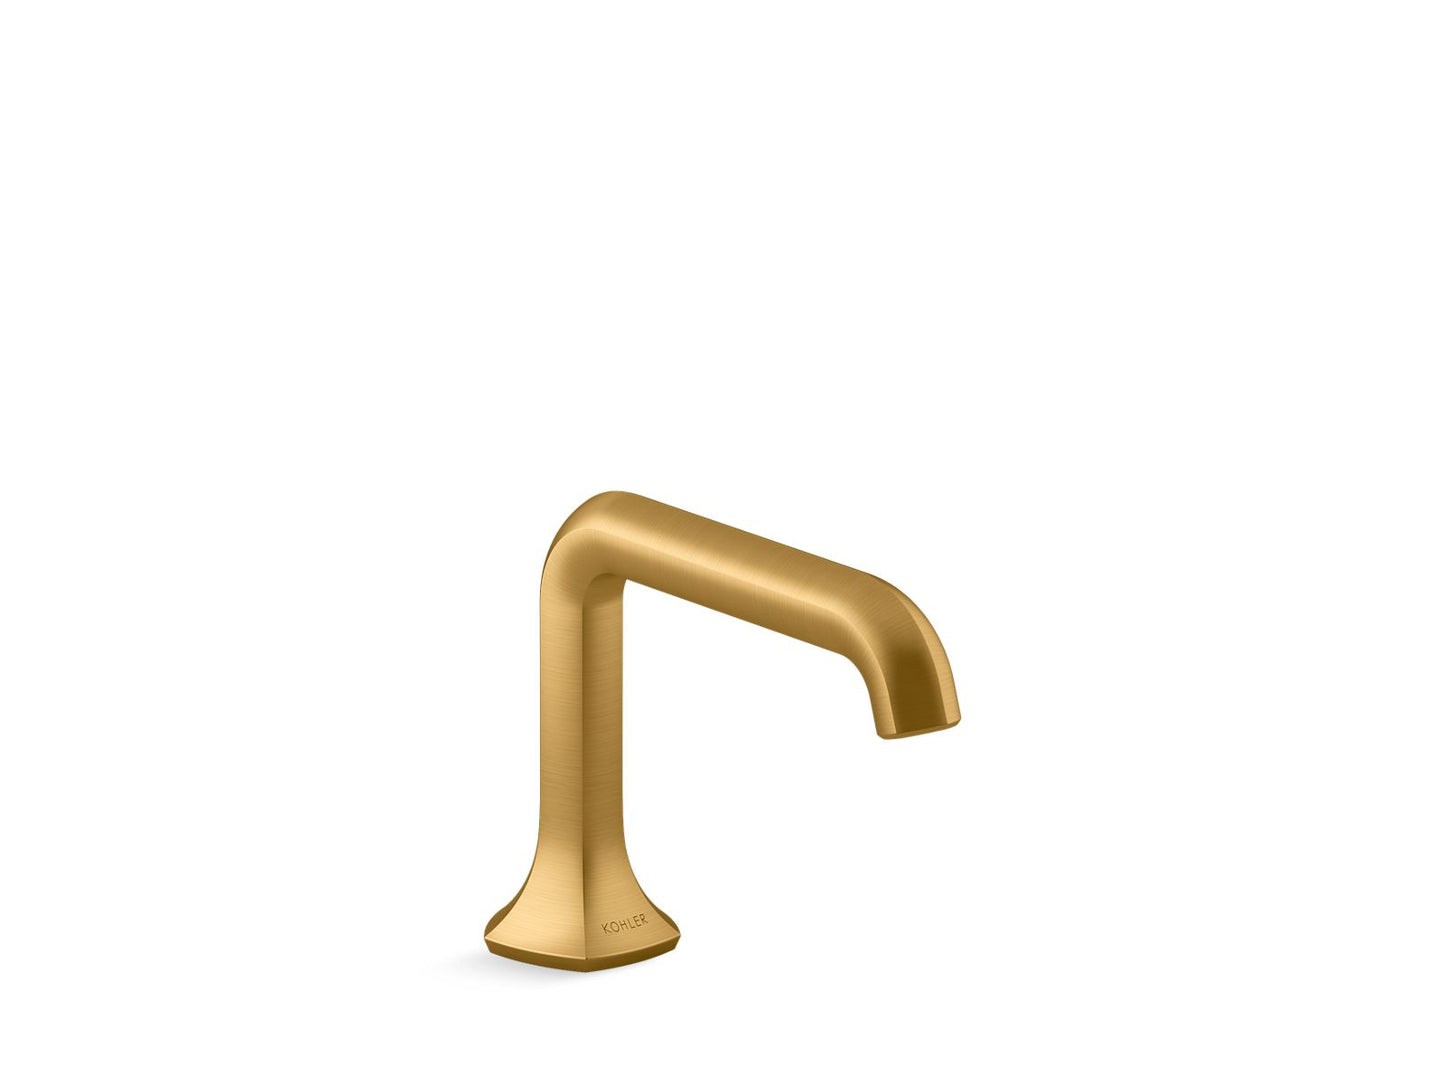 KOHLER K-27009-N-2MB Occasion Bathroom Sink Faucet Spout With Straight Design, 0.5 Gpm In Vibrant Brushed Moderne Brass